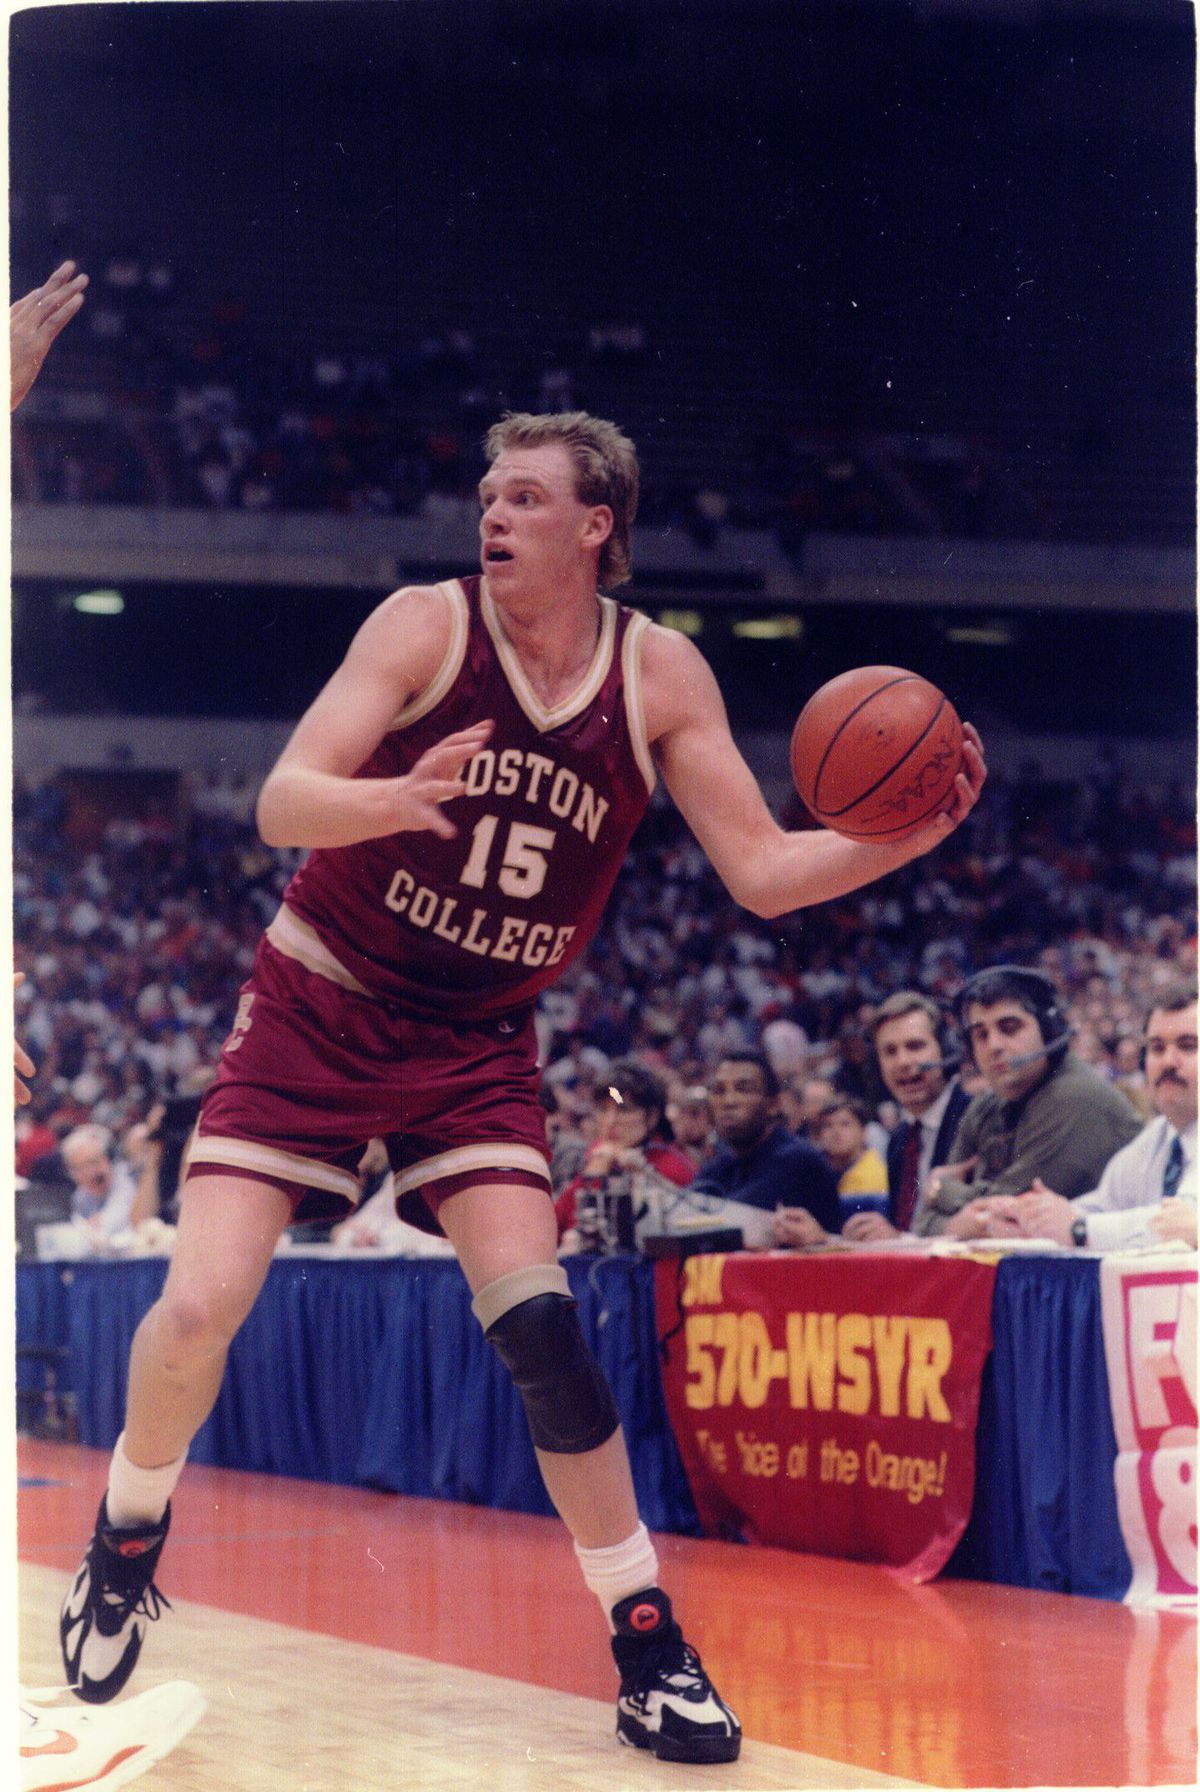 9 DEC 1993:  BOSTON COLLEGE EAGLES CENTER BILL CURLEY SAVES THE BALL FROM GOING OUT OF BOUNDS DURING